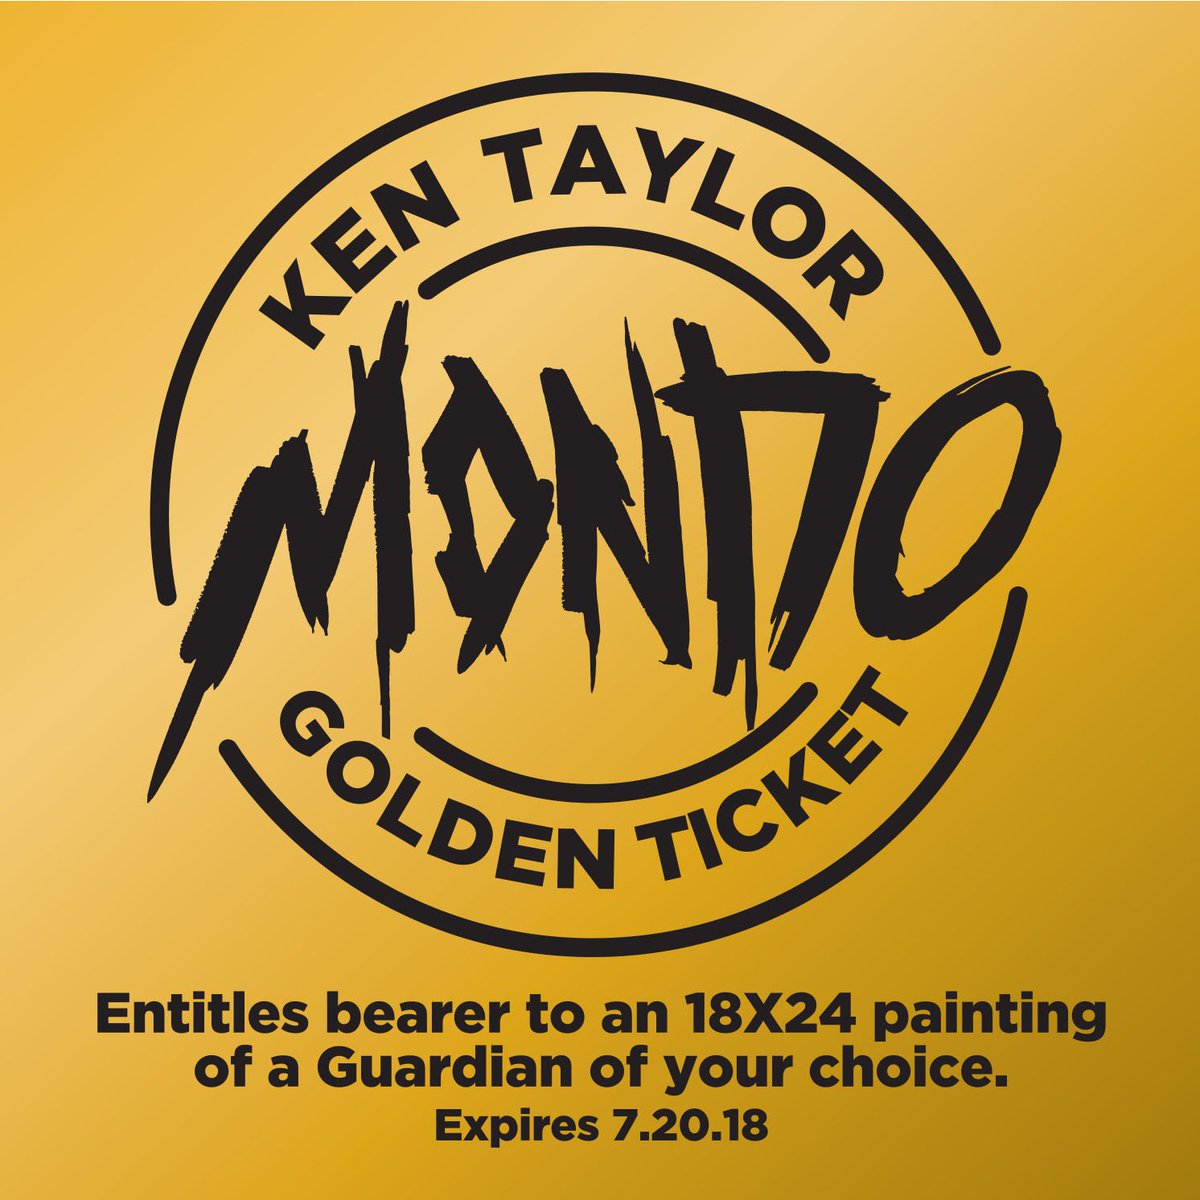 Randomly inserted into 1 GUARDIANS order, this Golden Ticket will get you an 18'x24' painting of a Guardian of your choice by @kentaylorart!